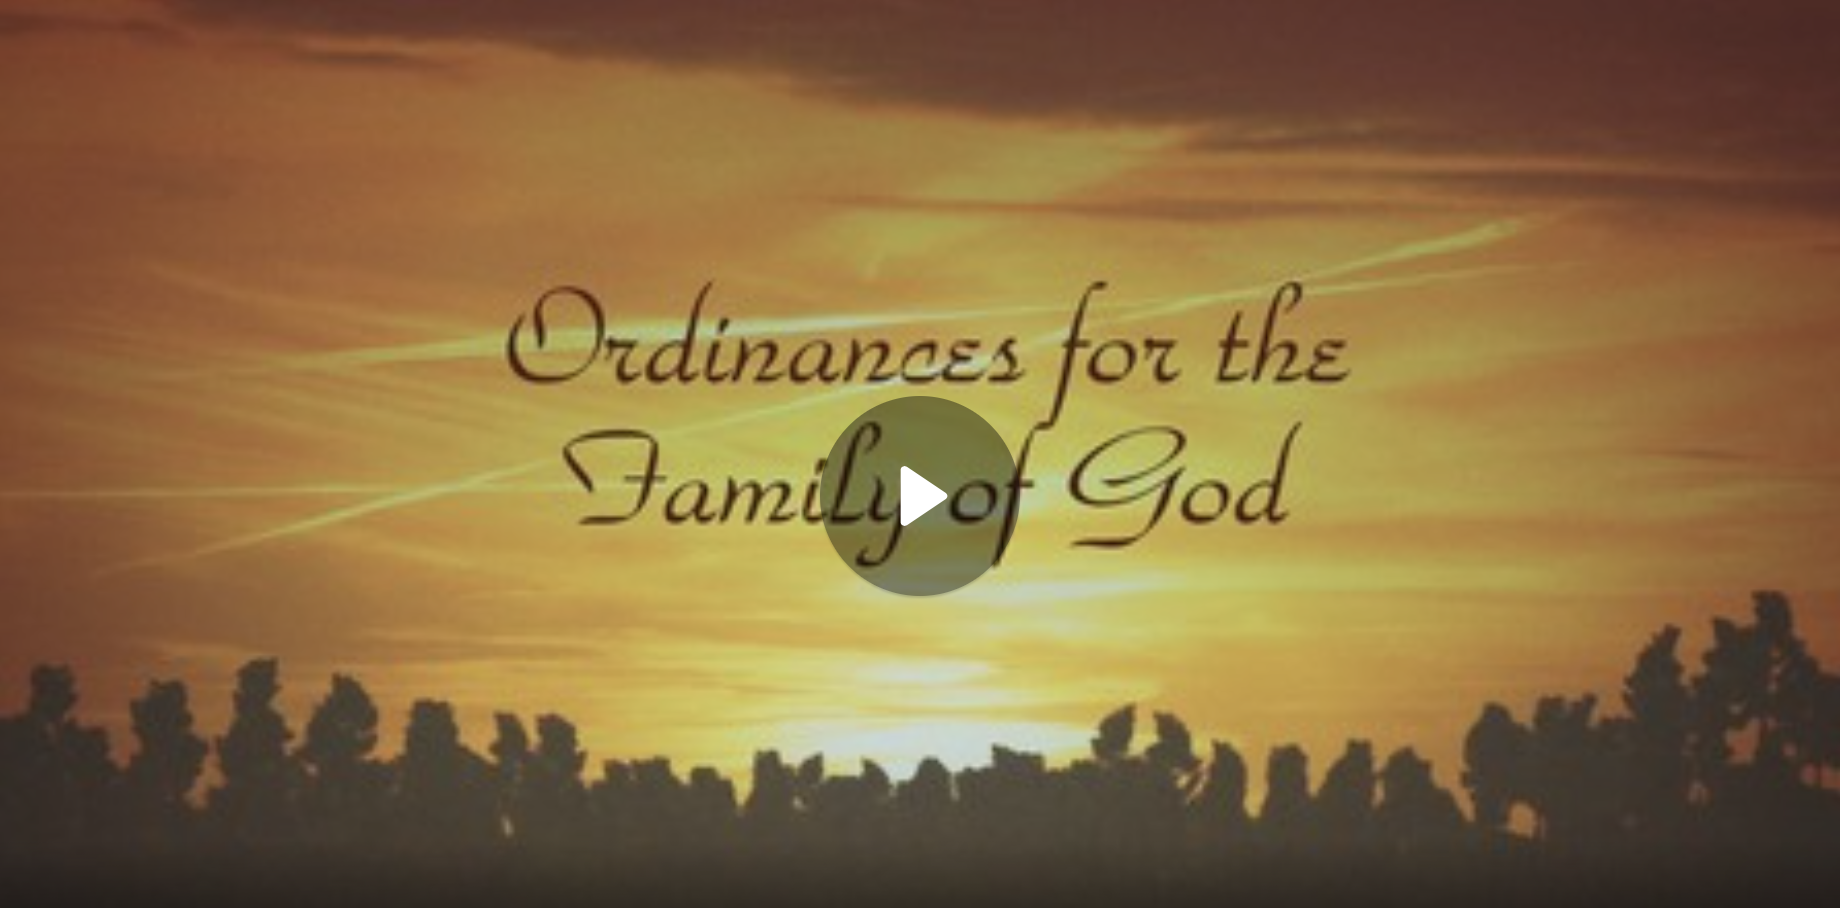 Ordinances for the Family of God